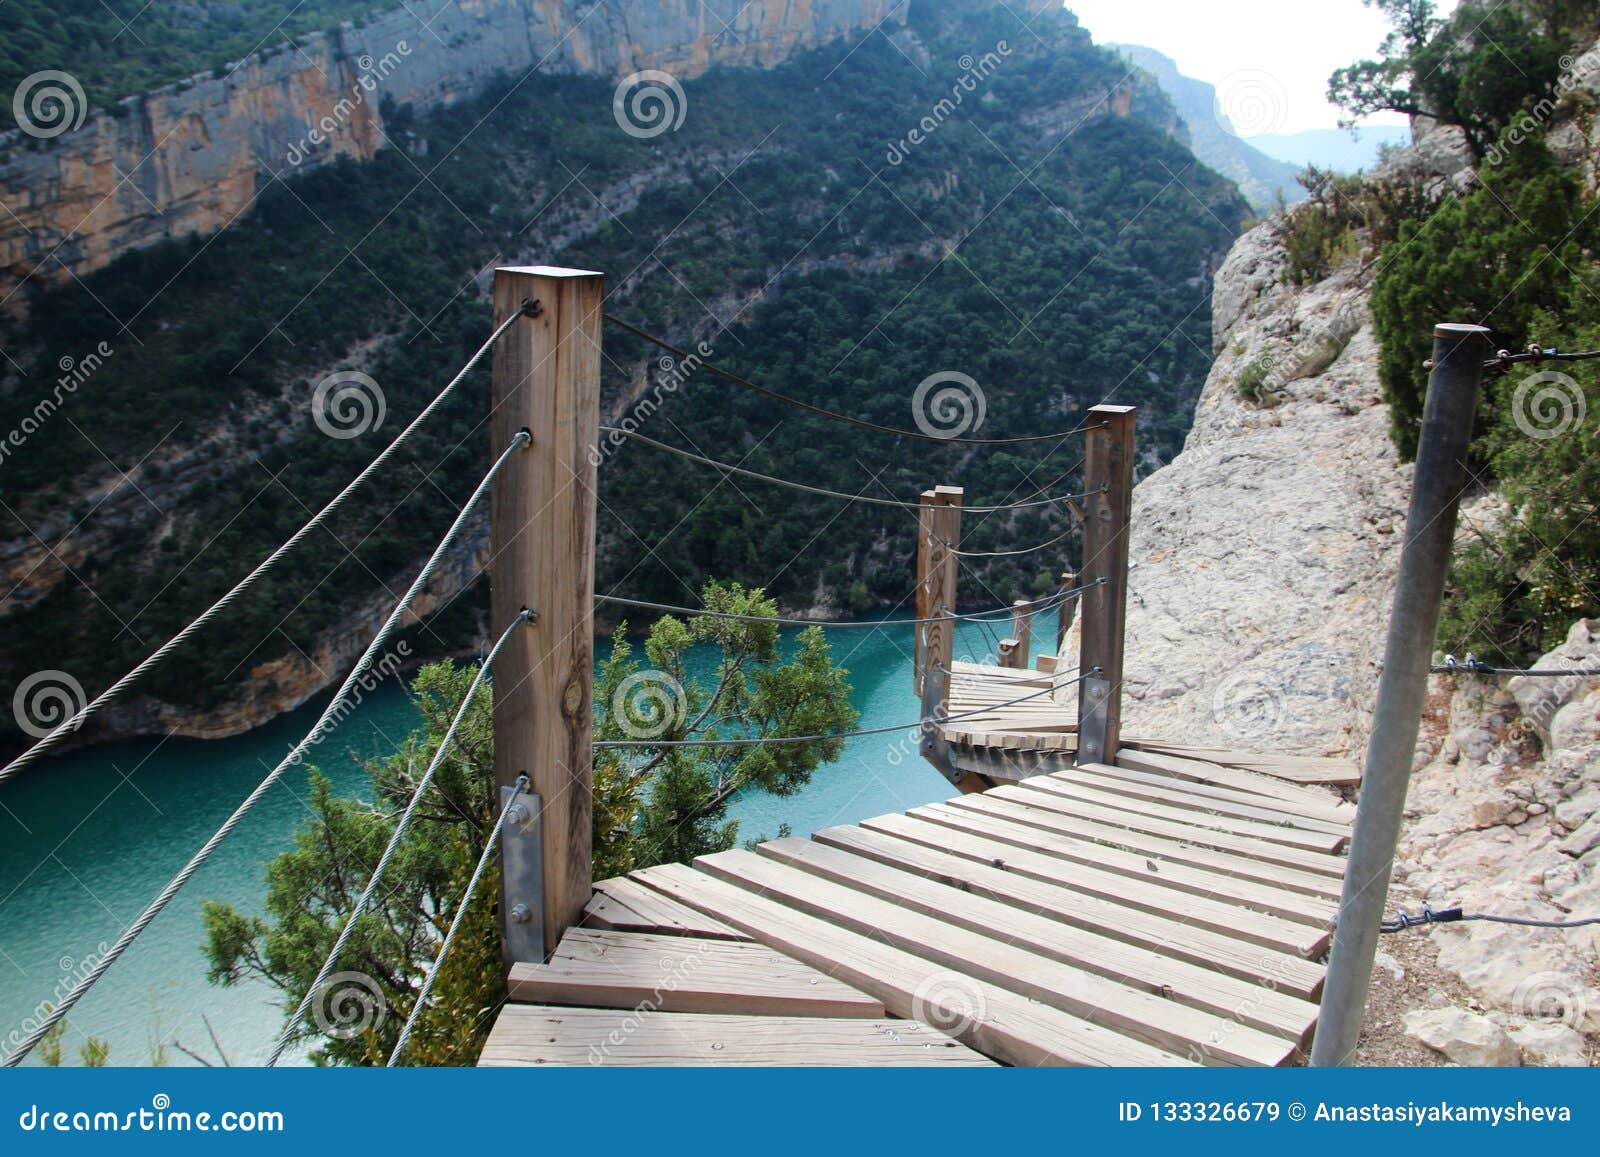 a wooden staircase at rock cliff as part of hiking path in mont rebei canyon, spain